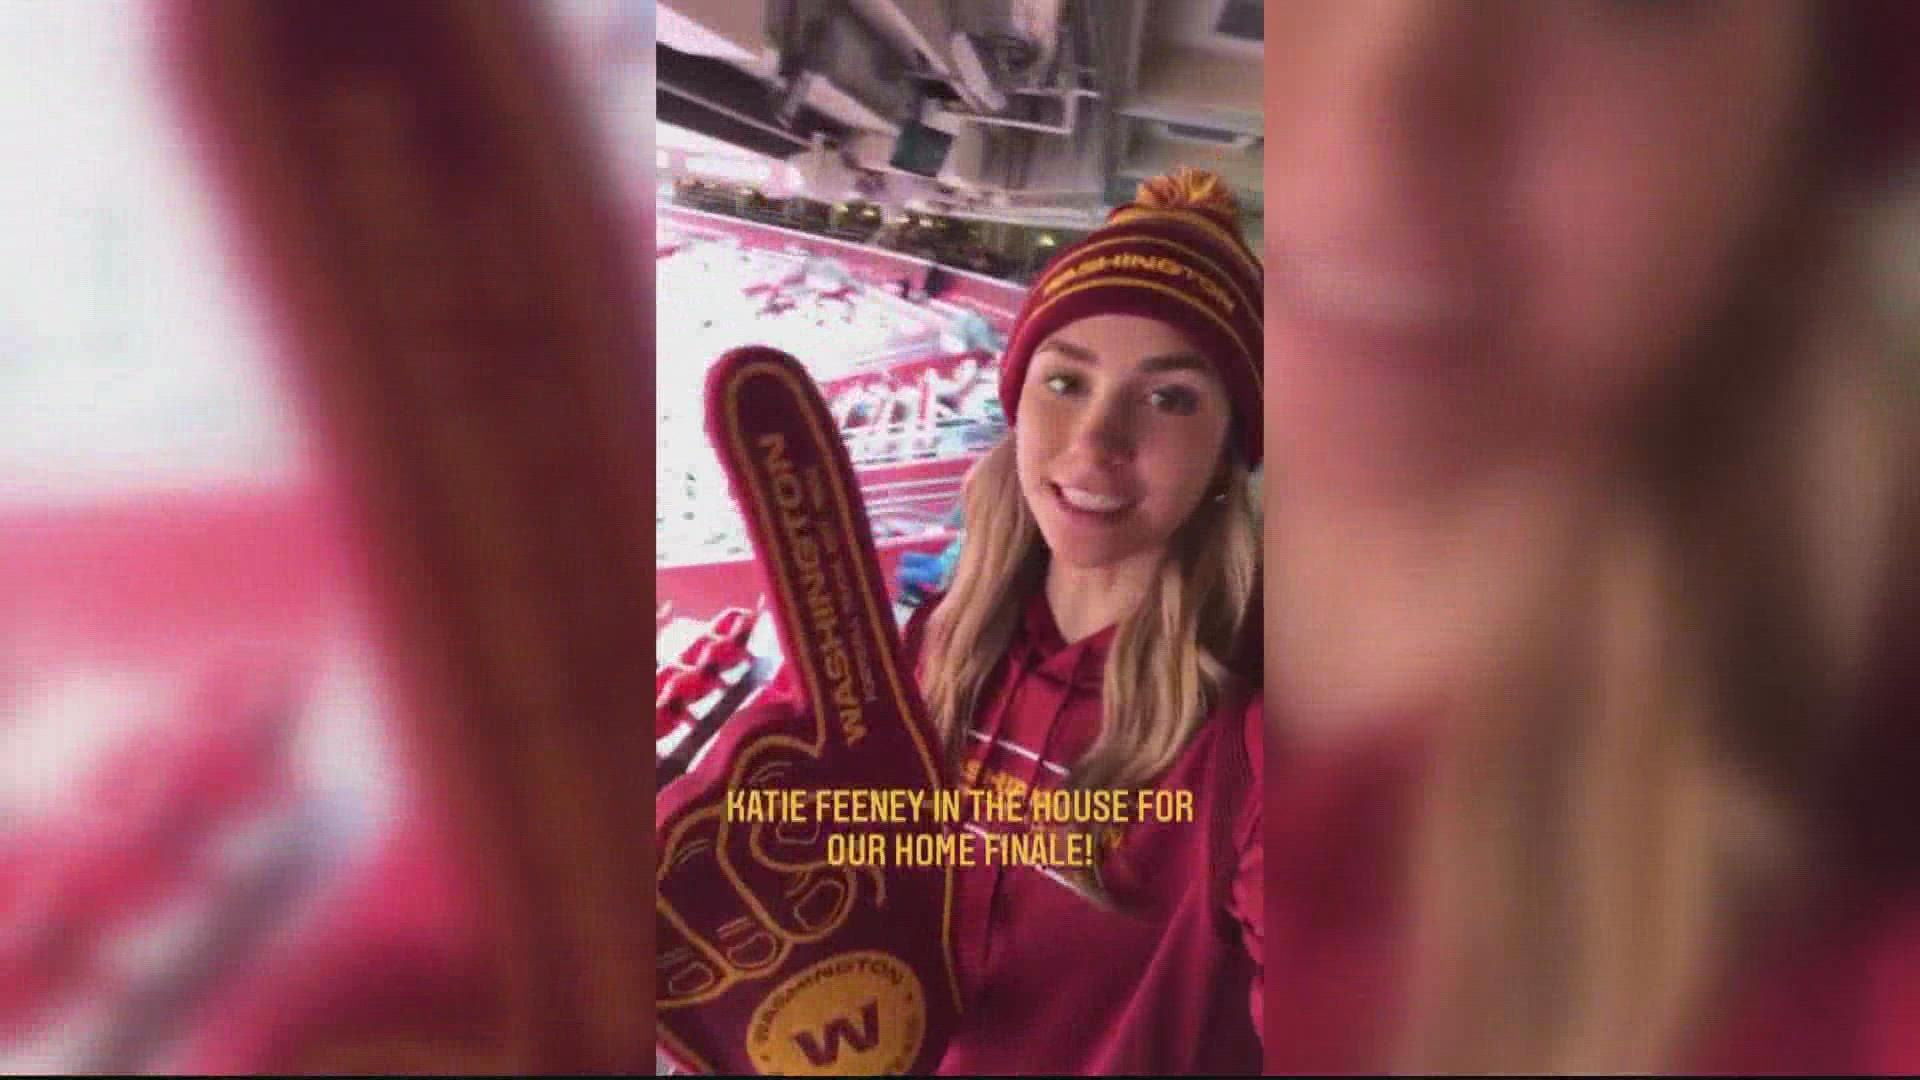 Katie Feeney who is from Maryland has over 10 million followers on social media.